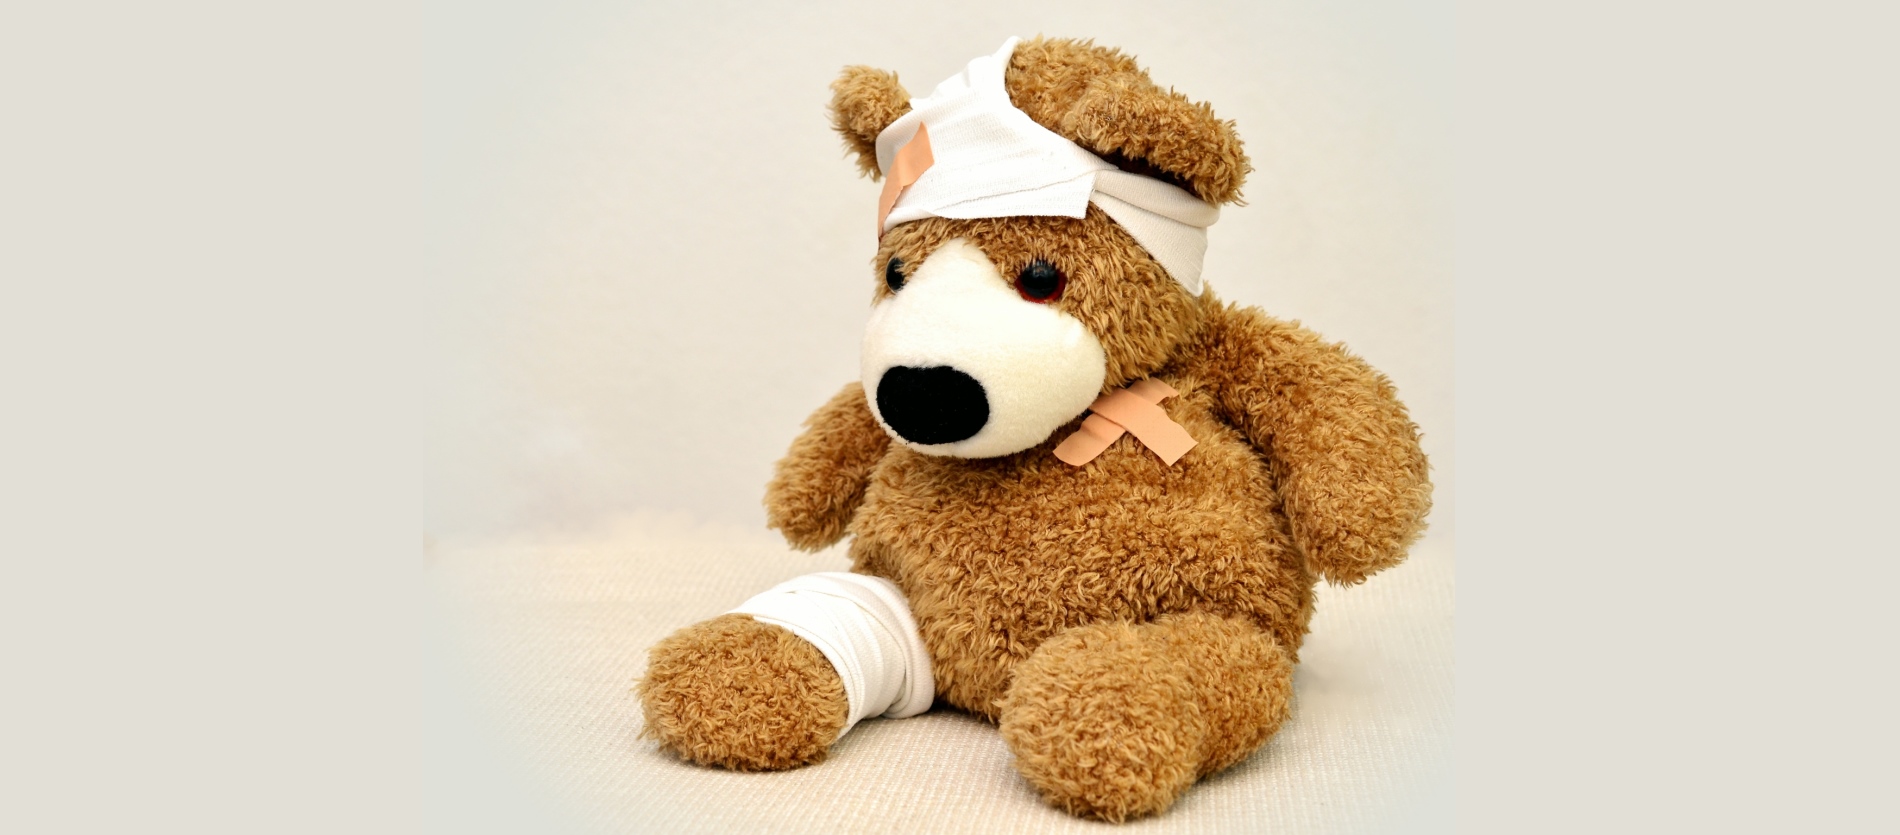 Injured teddy bear with bandaged leg, head and a band-aide on its torso.